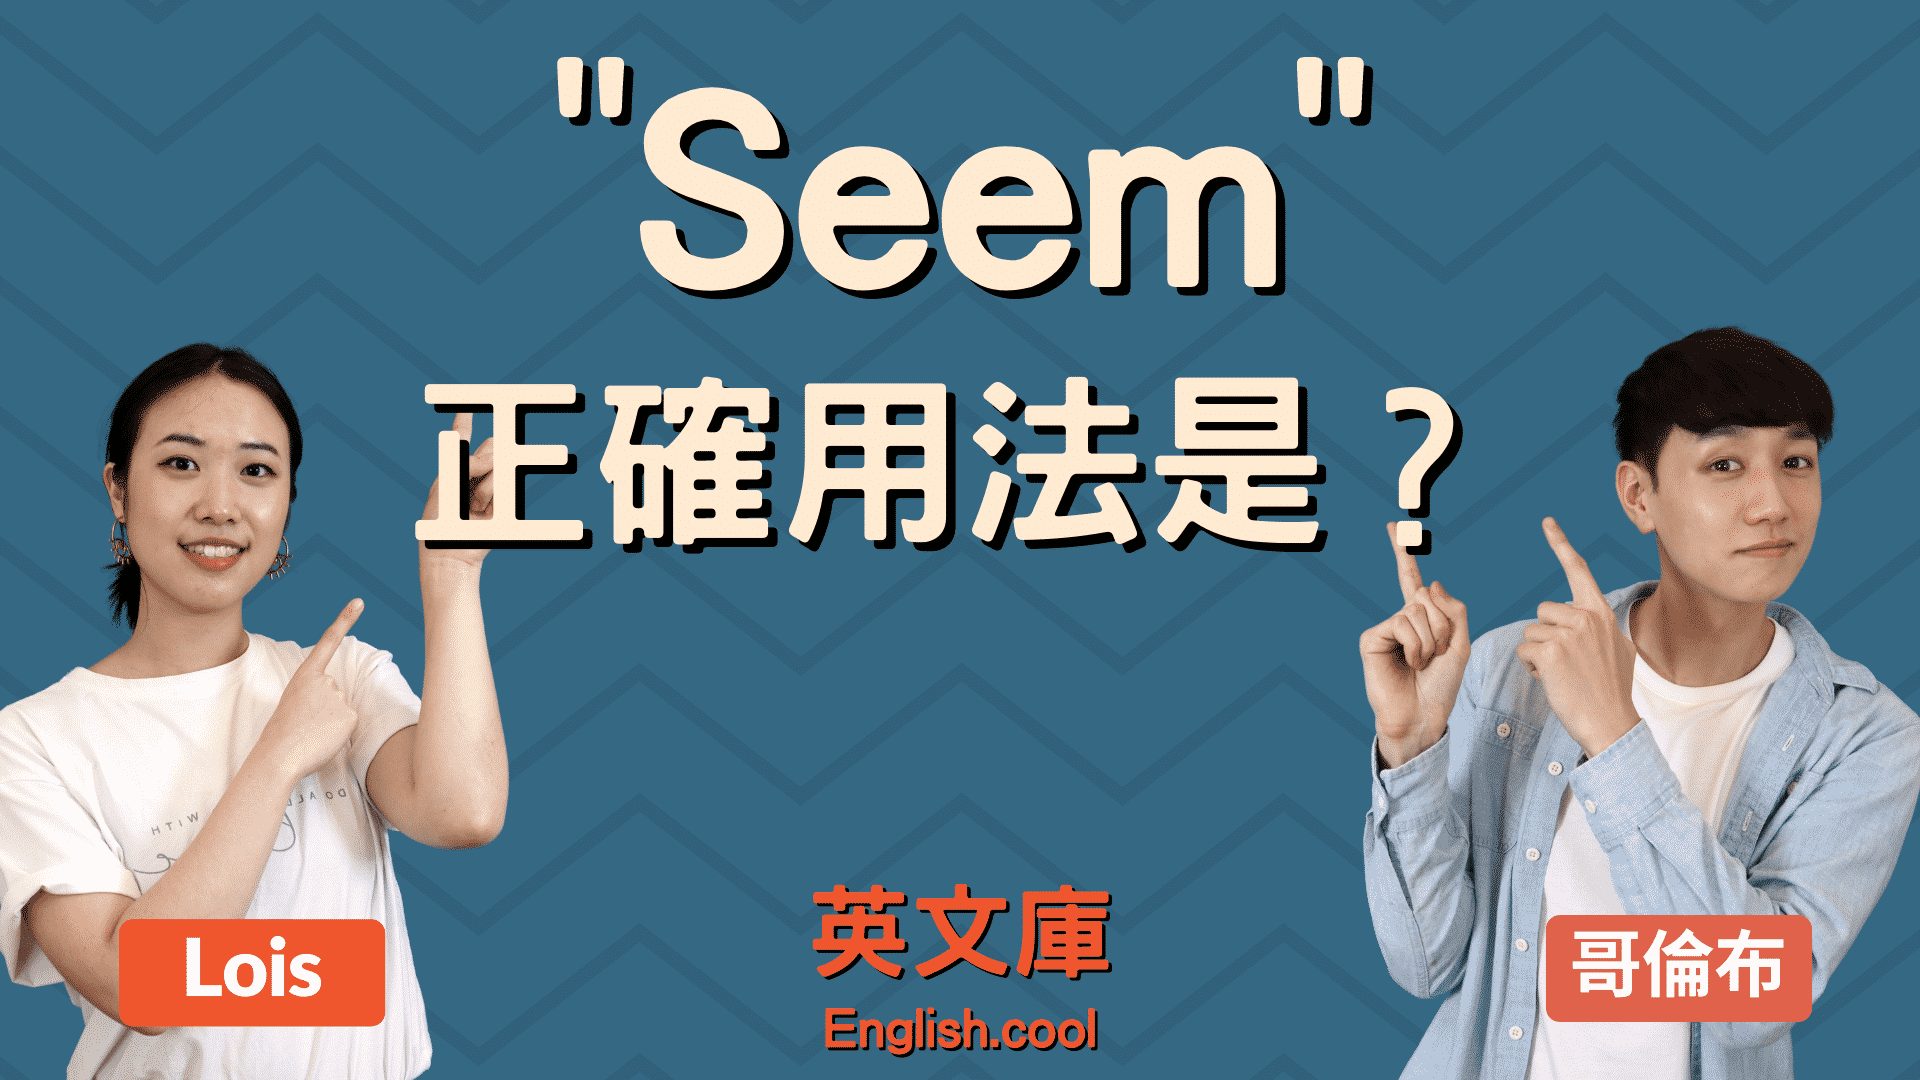 You are currently viewing 「seem」正確用法是？跟 appear 用法差在哪？